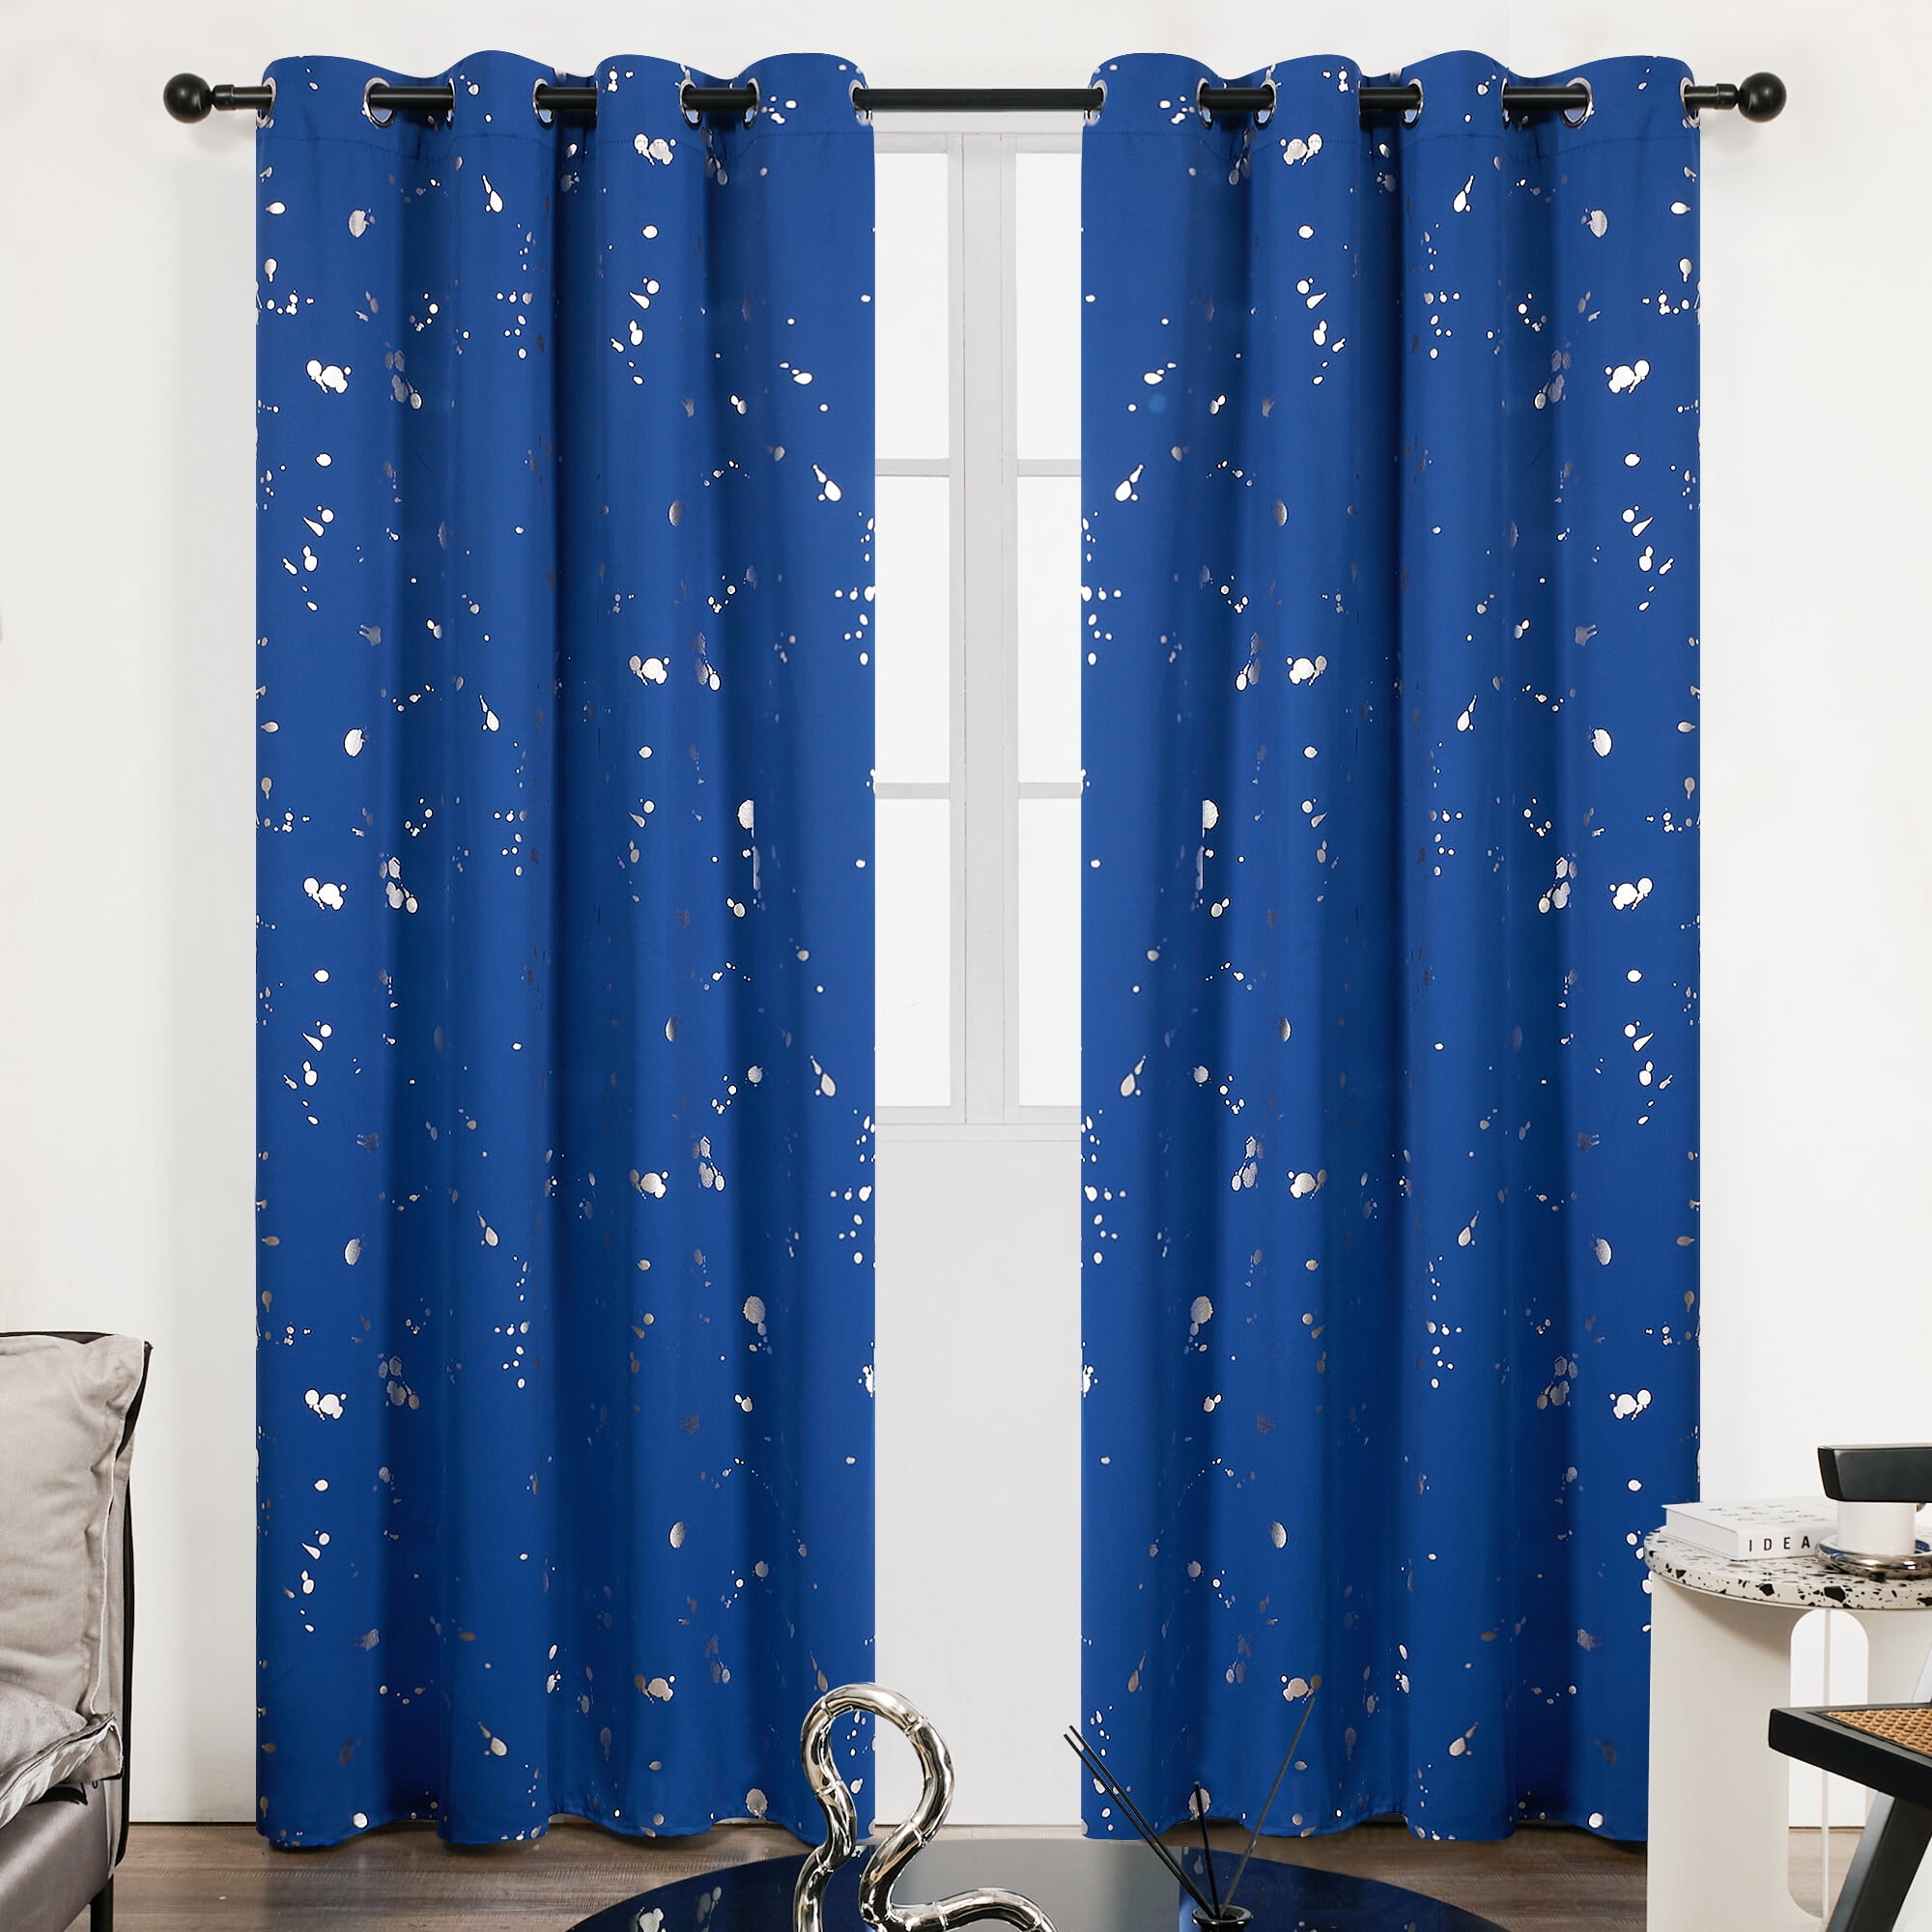 Width x Length Deconovo Eyelet Curtains Thermal Insulated Curtains Gold Constellation Printed Curtains for Bedroom Royal Blue 52 x 63 Inch Blackout Curtains 2 panels 